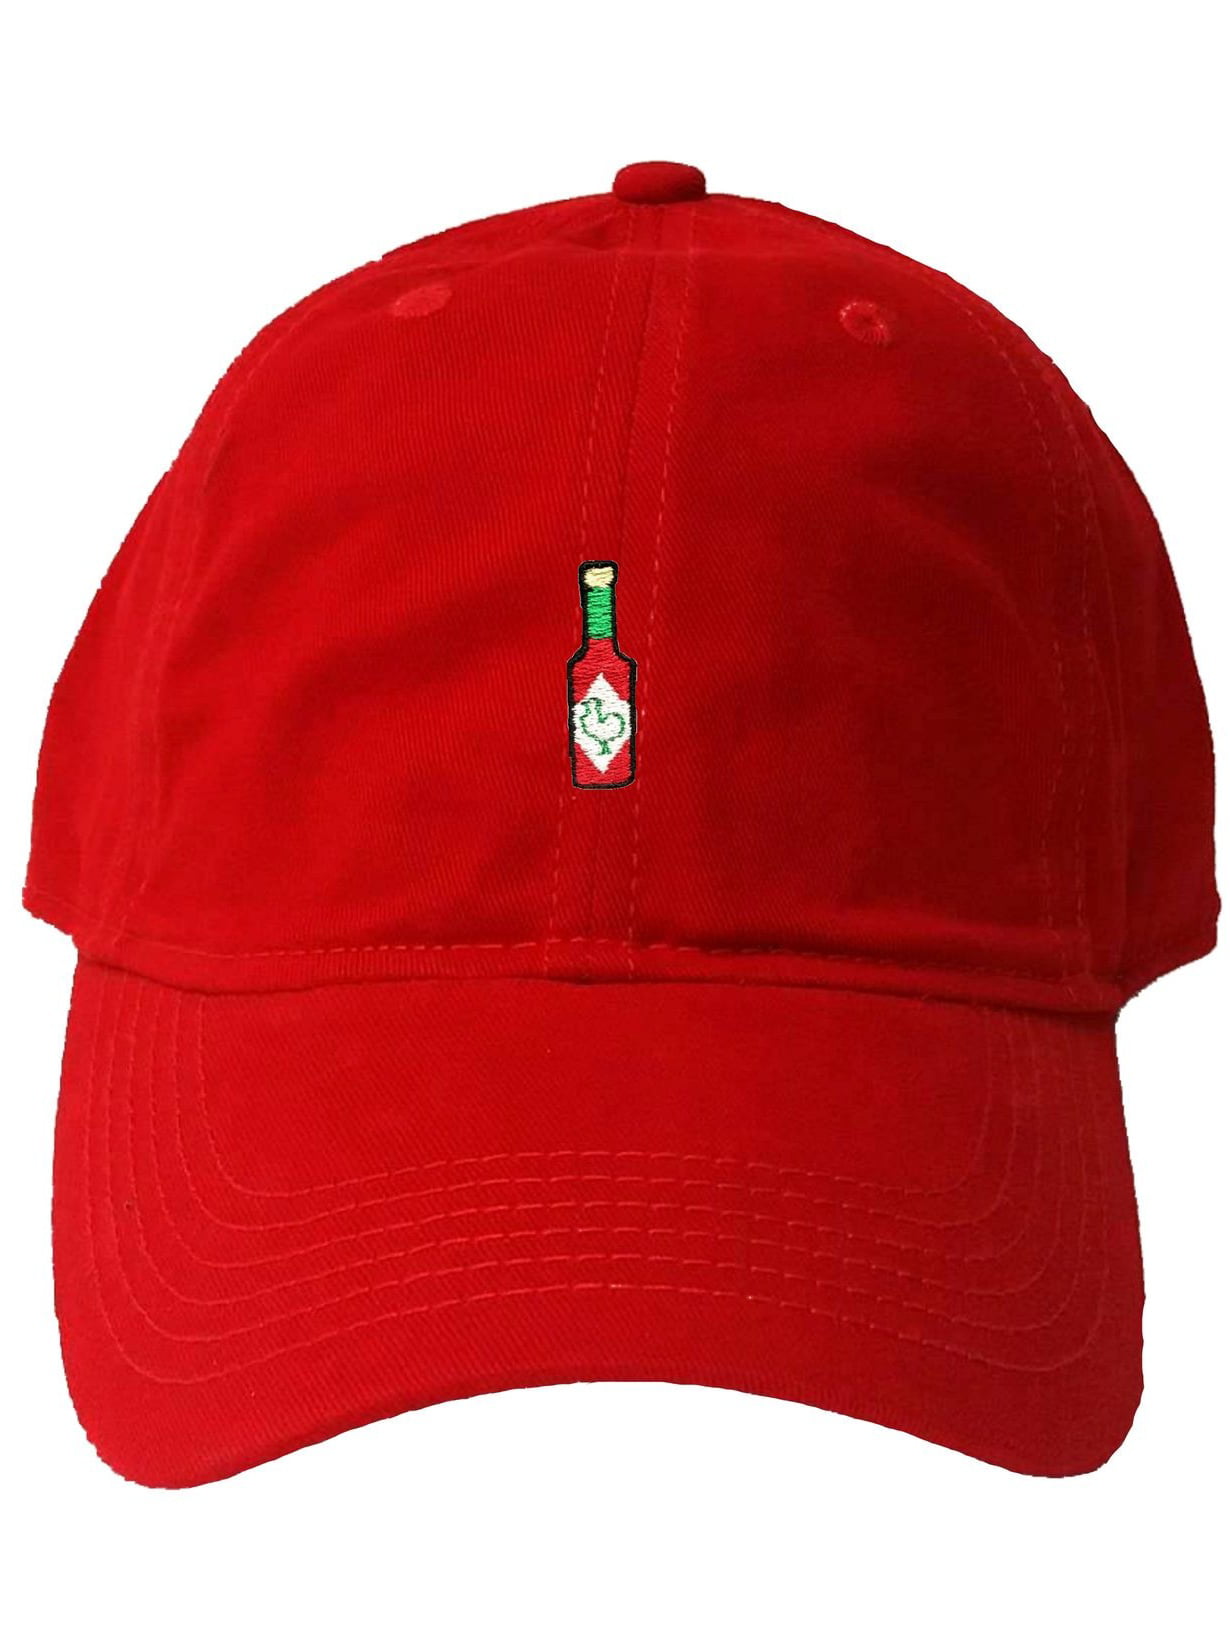 Go All Out Adult Chicken Embroidered Visor Dad Hat 